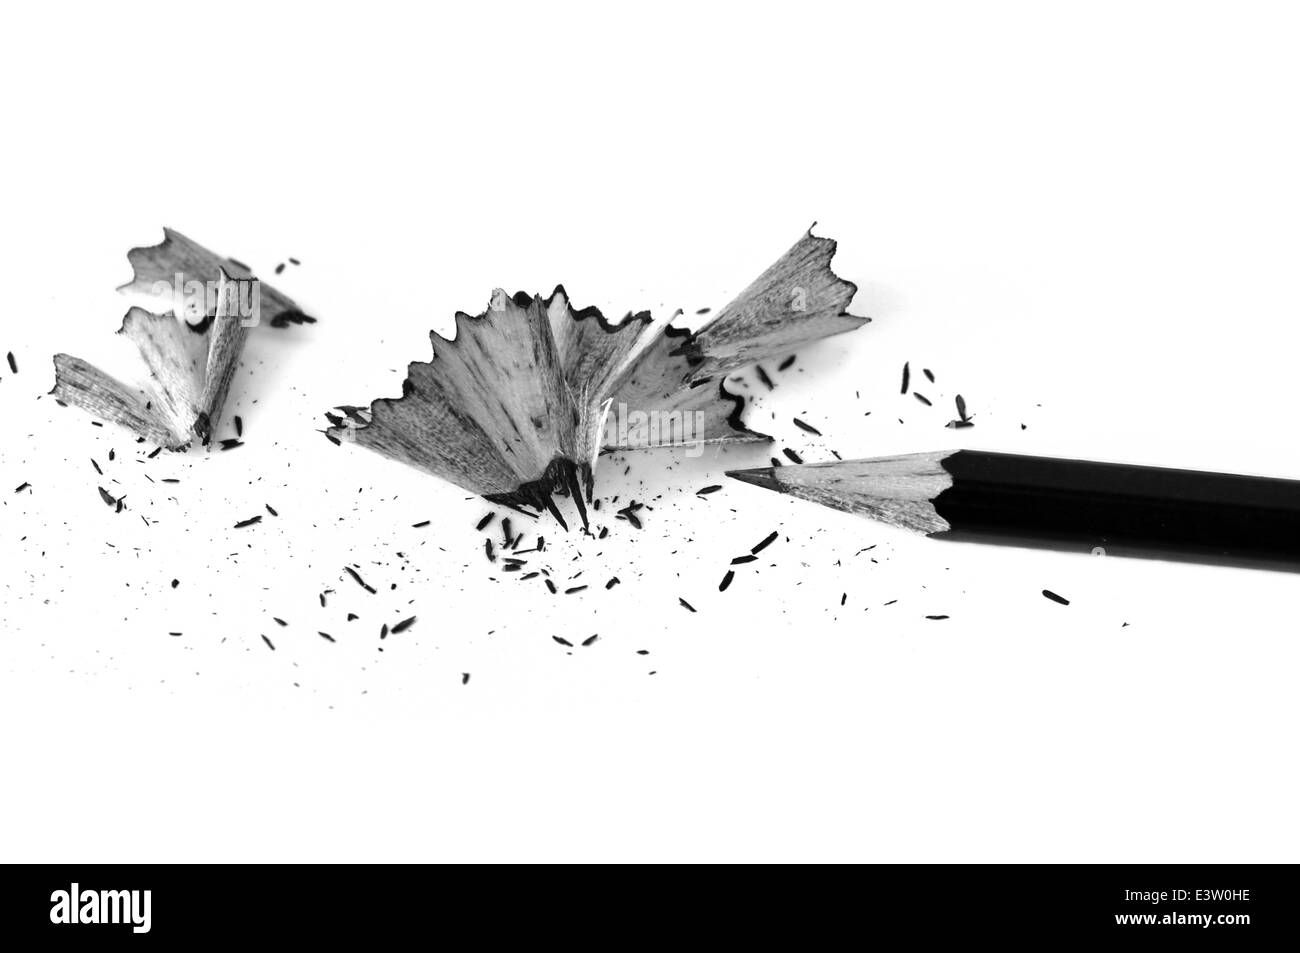 Sharpened pencil and shavings background. Black and white. Stock Photo